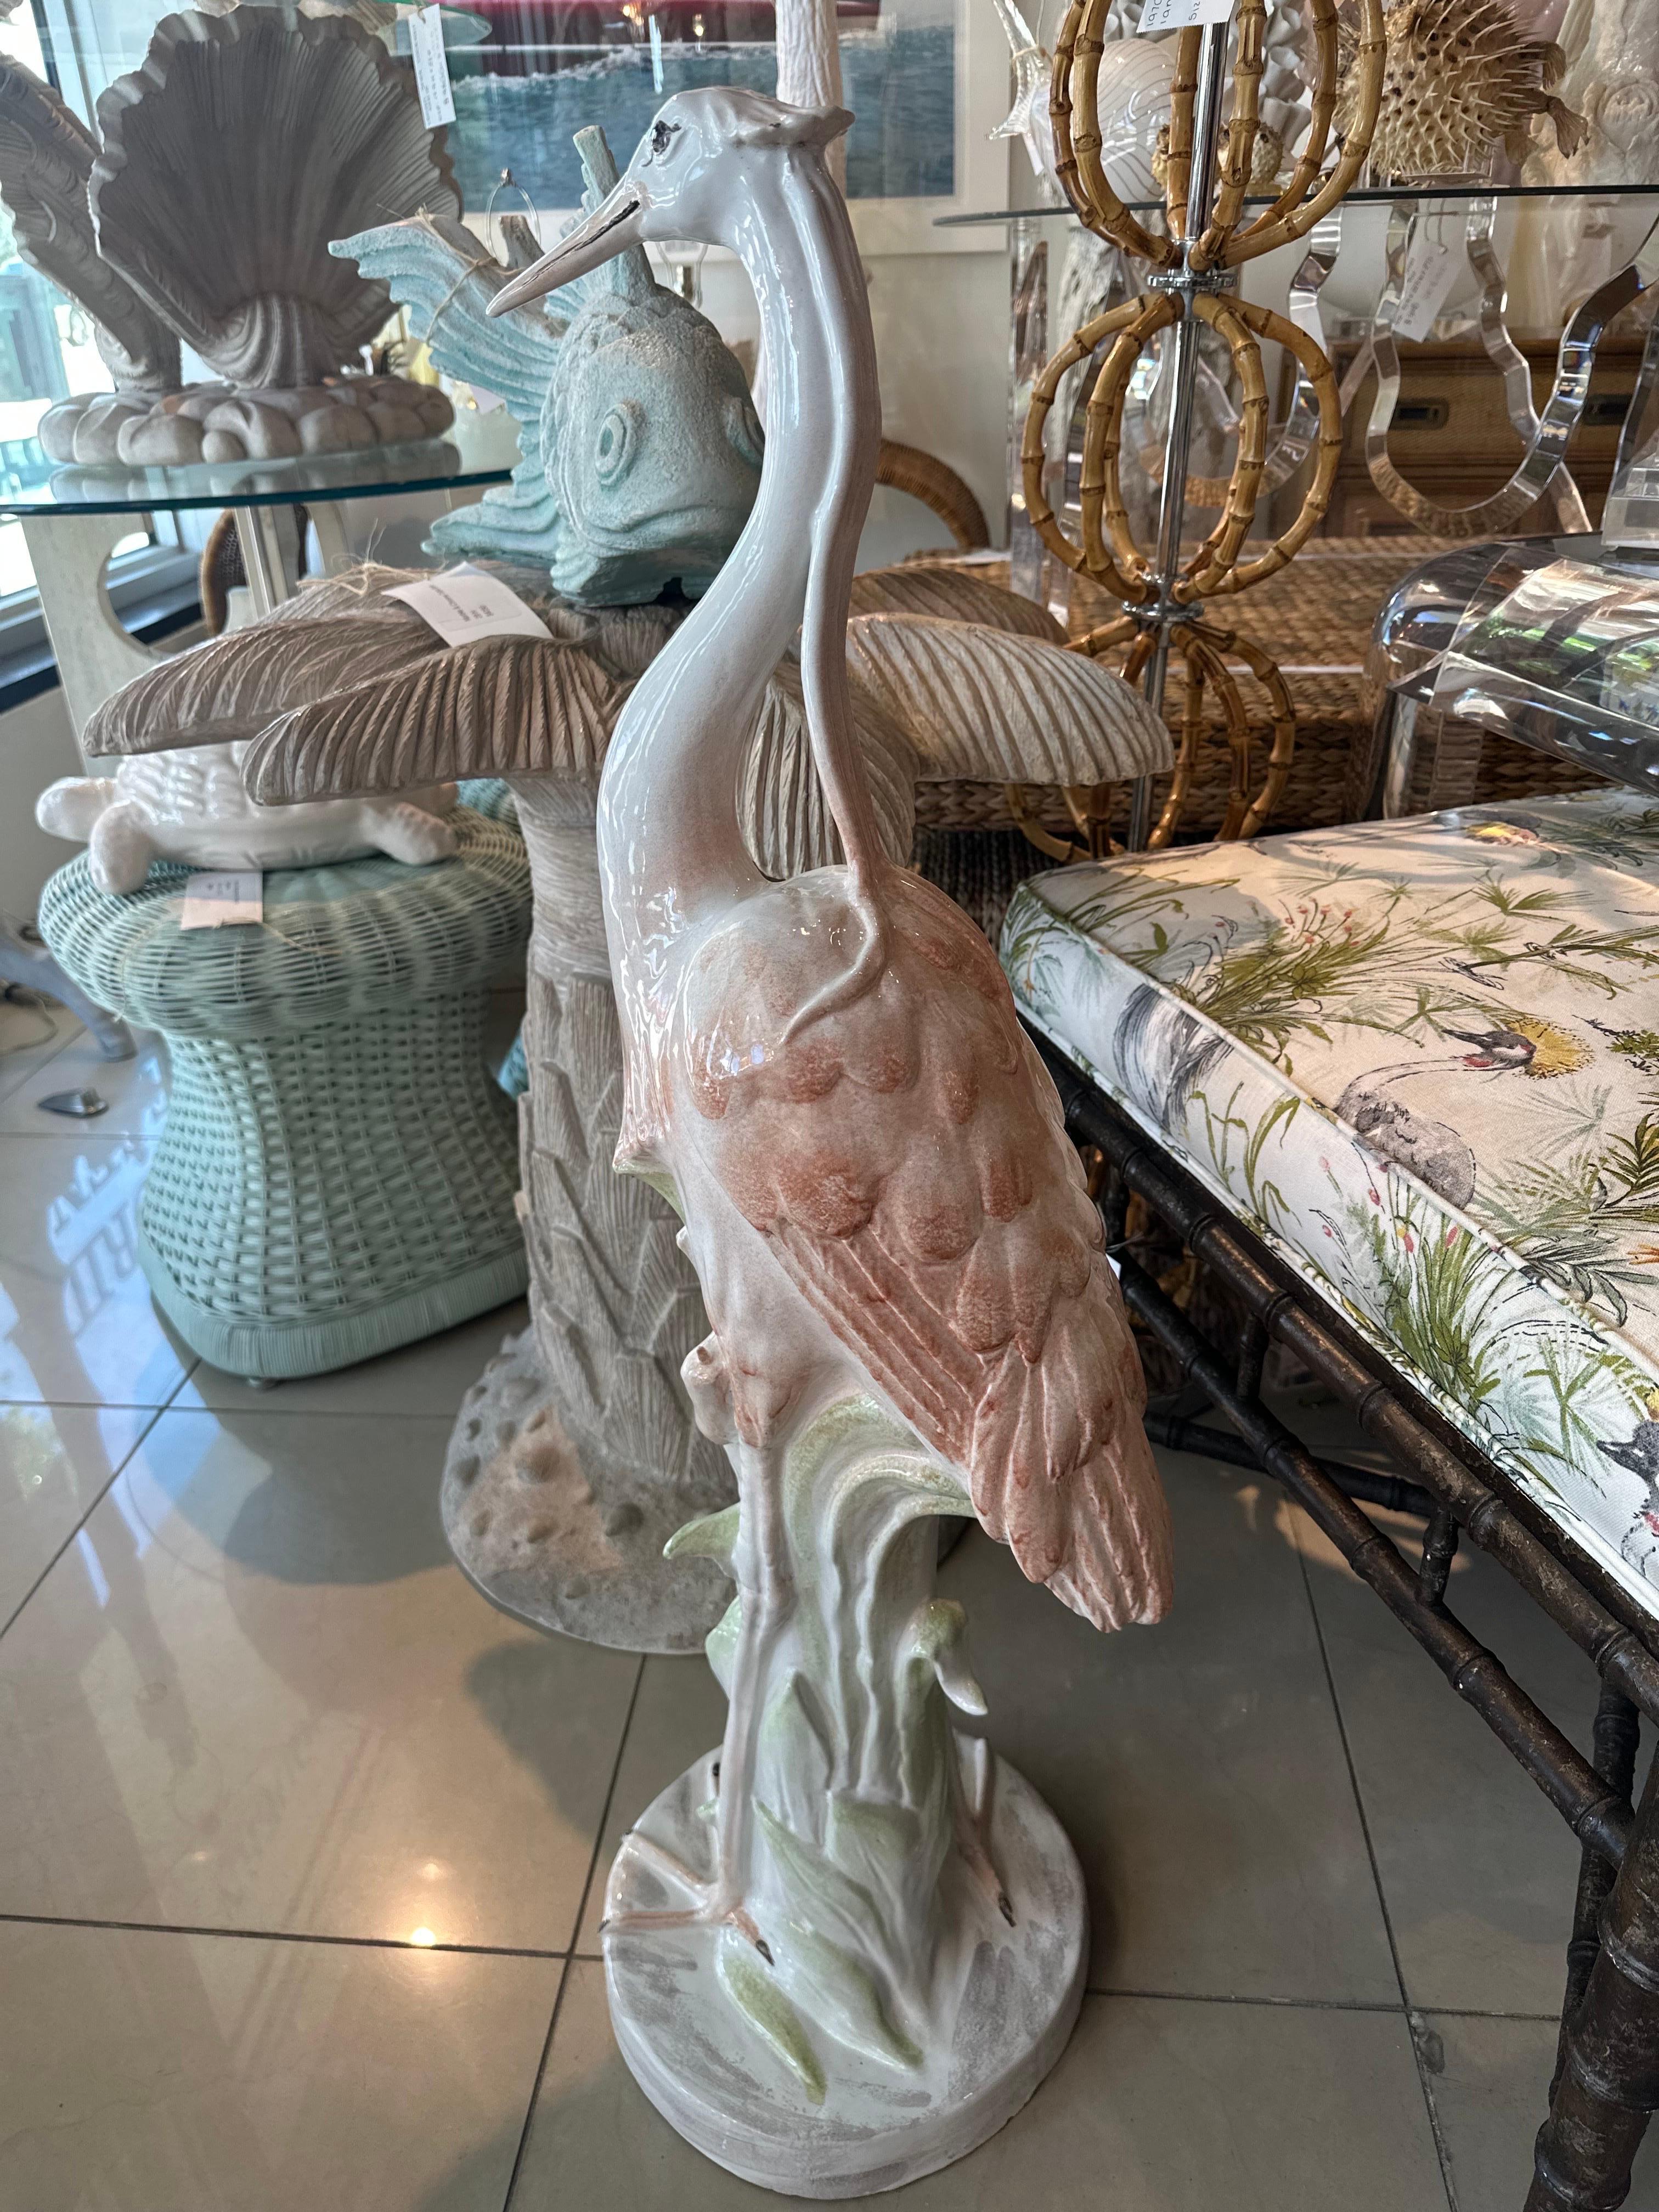 Lovely vintage ceramic tropical pink flamingo, Made in Italy. No chips or breaks. Beautiful colors! Perfect for the tropical island, Palm Beach look. Dimensions: 39 H x 12 D. Please let me know if you would like an additional shipping quote. 